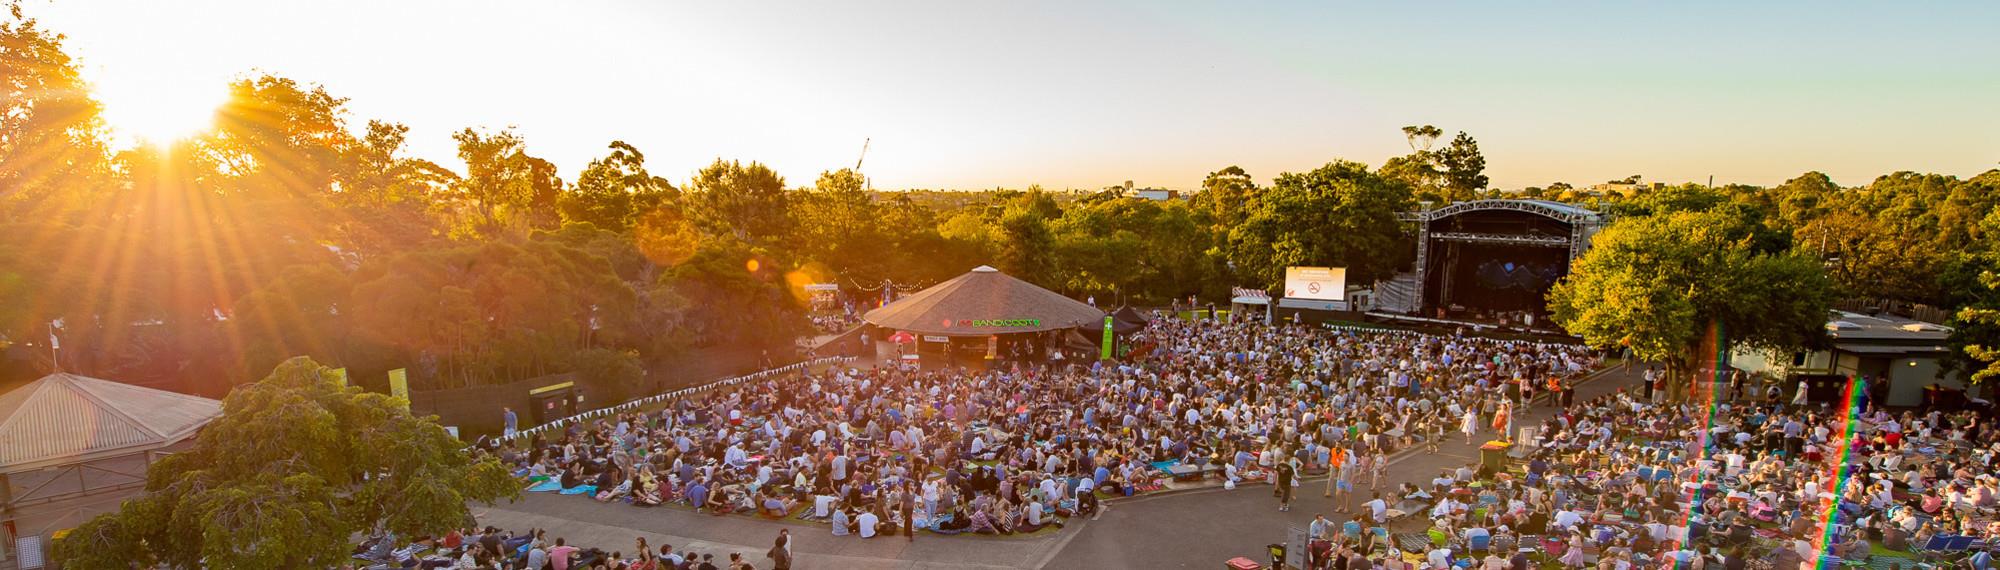 Zoo Twilights stage and crowd at concert at sunset